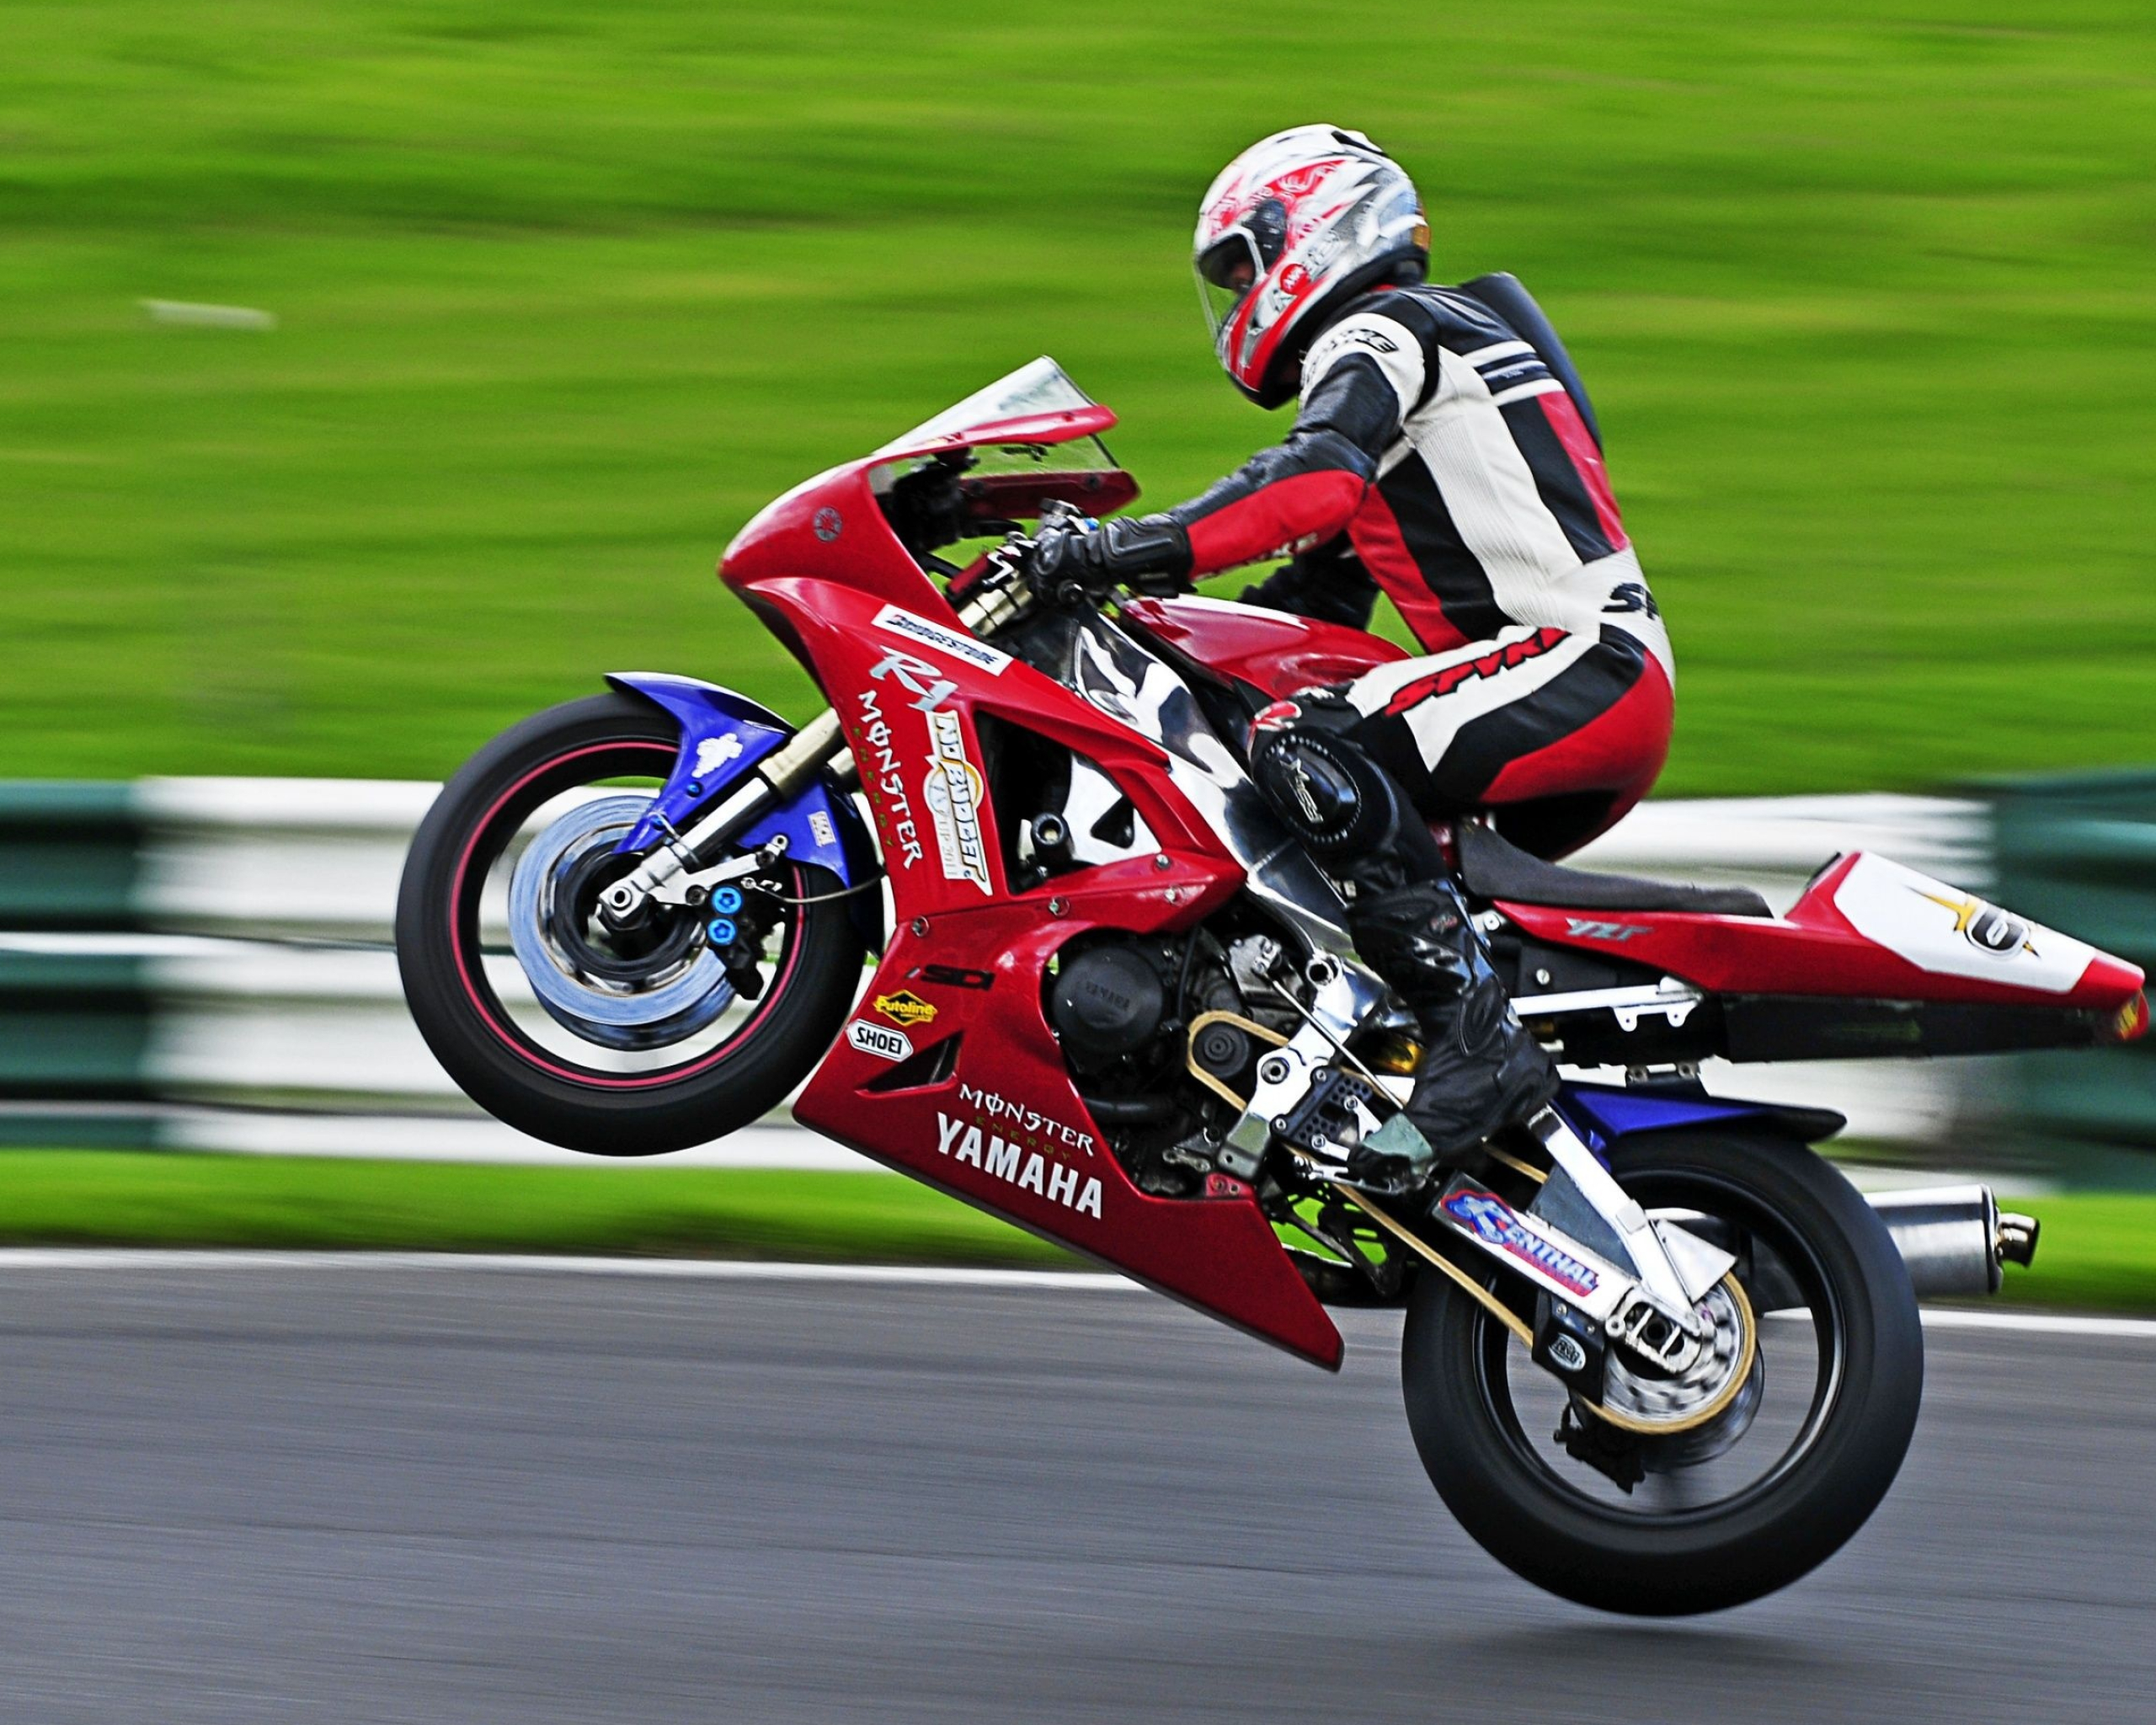 Motorcycle Racing: Wheelie Trick On a High Speed, Masterful Performance of a Motoracer. 2560x2050 HD Background.